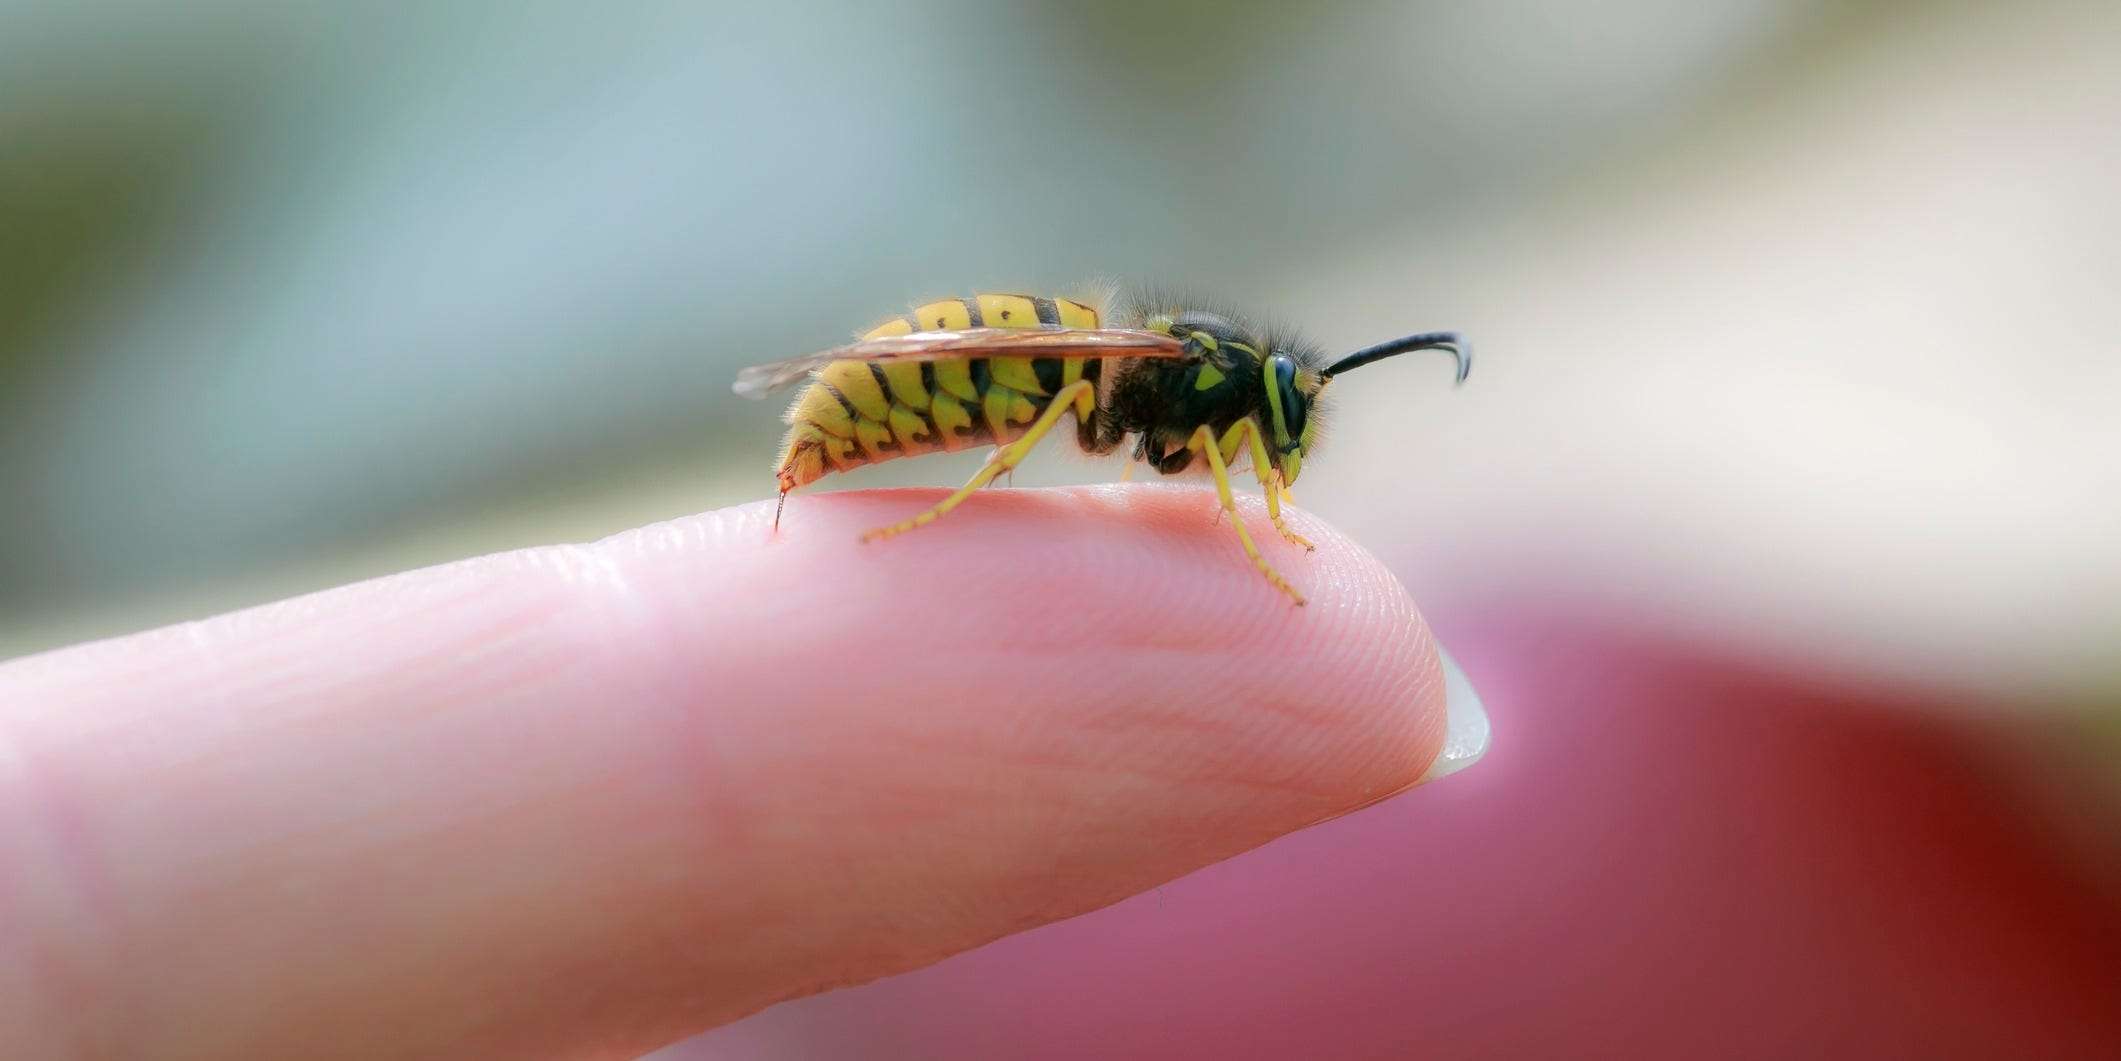 The most effective treatments and home remedies for a wasp sting